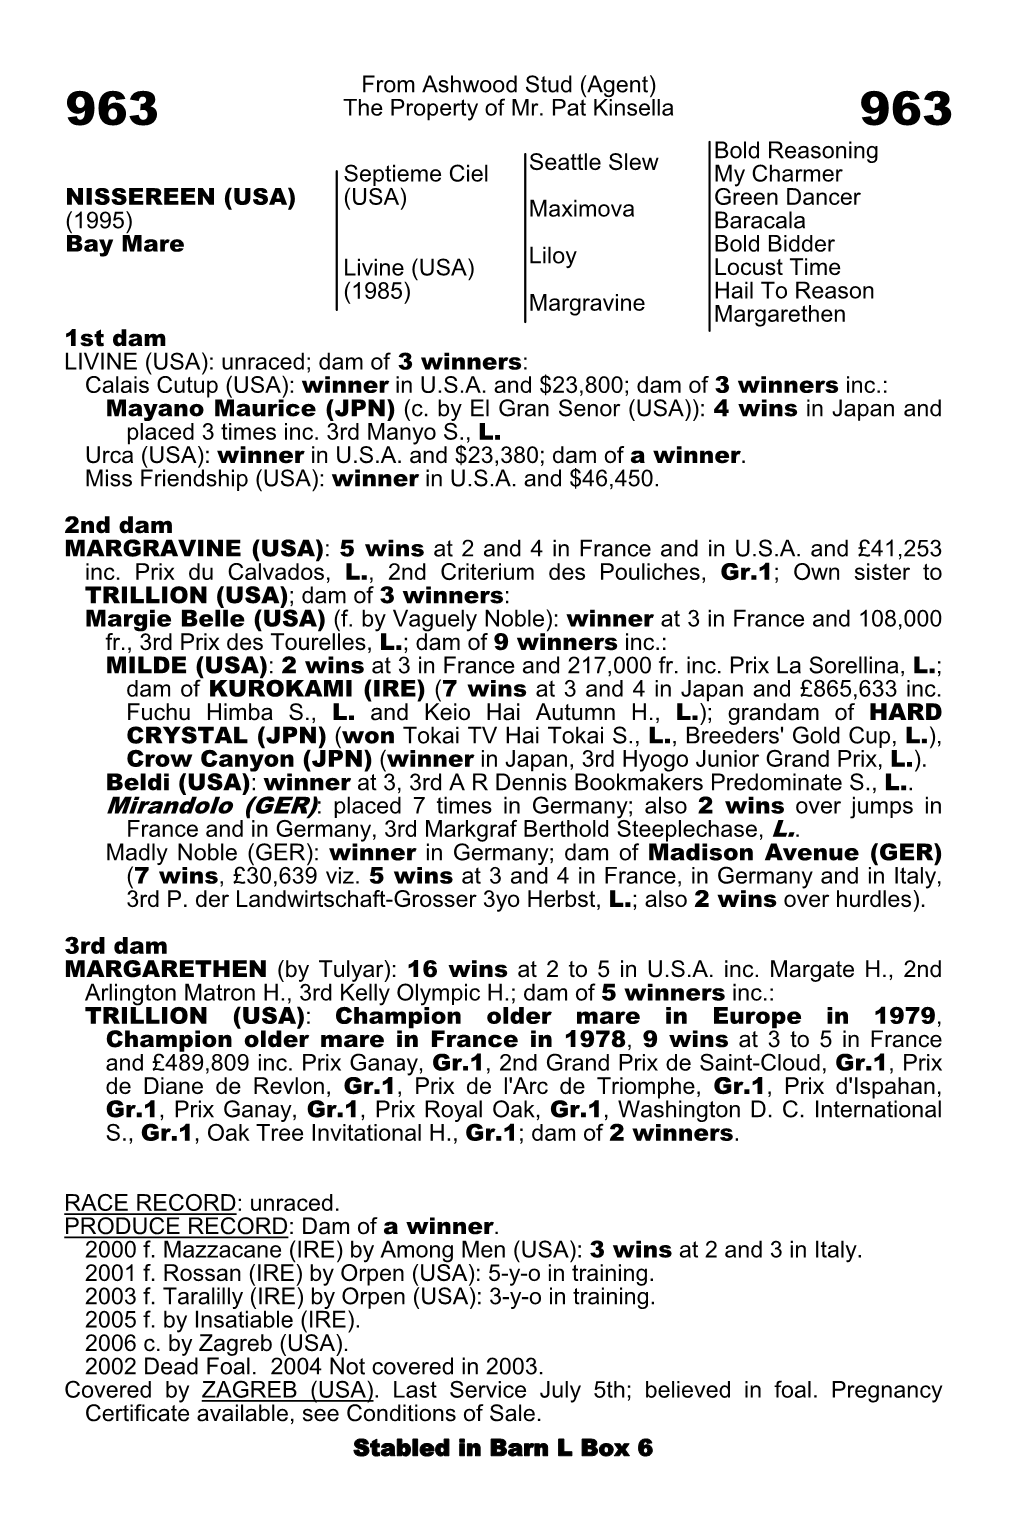 From Ashwood Stud (Agent) 963 the Property of Mr